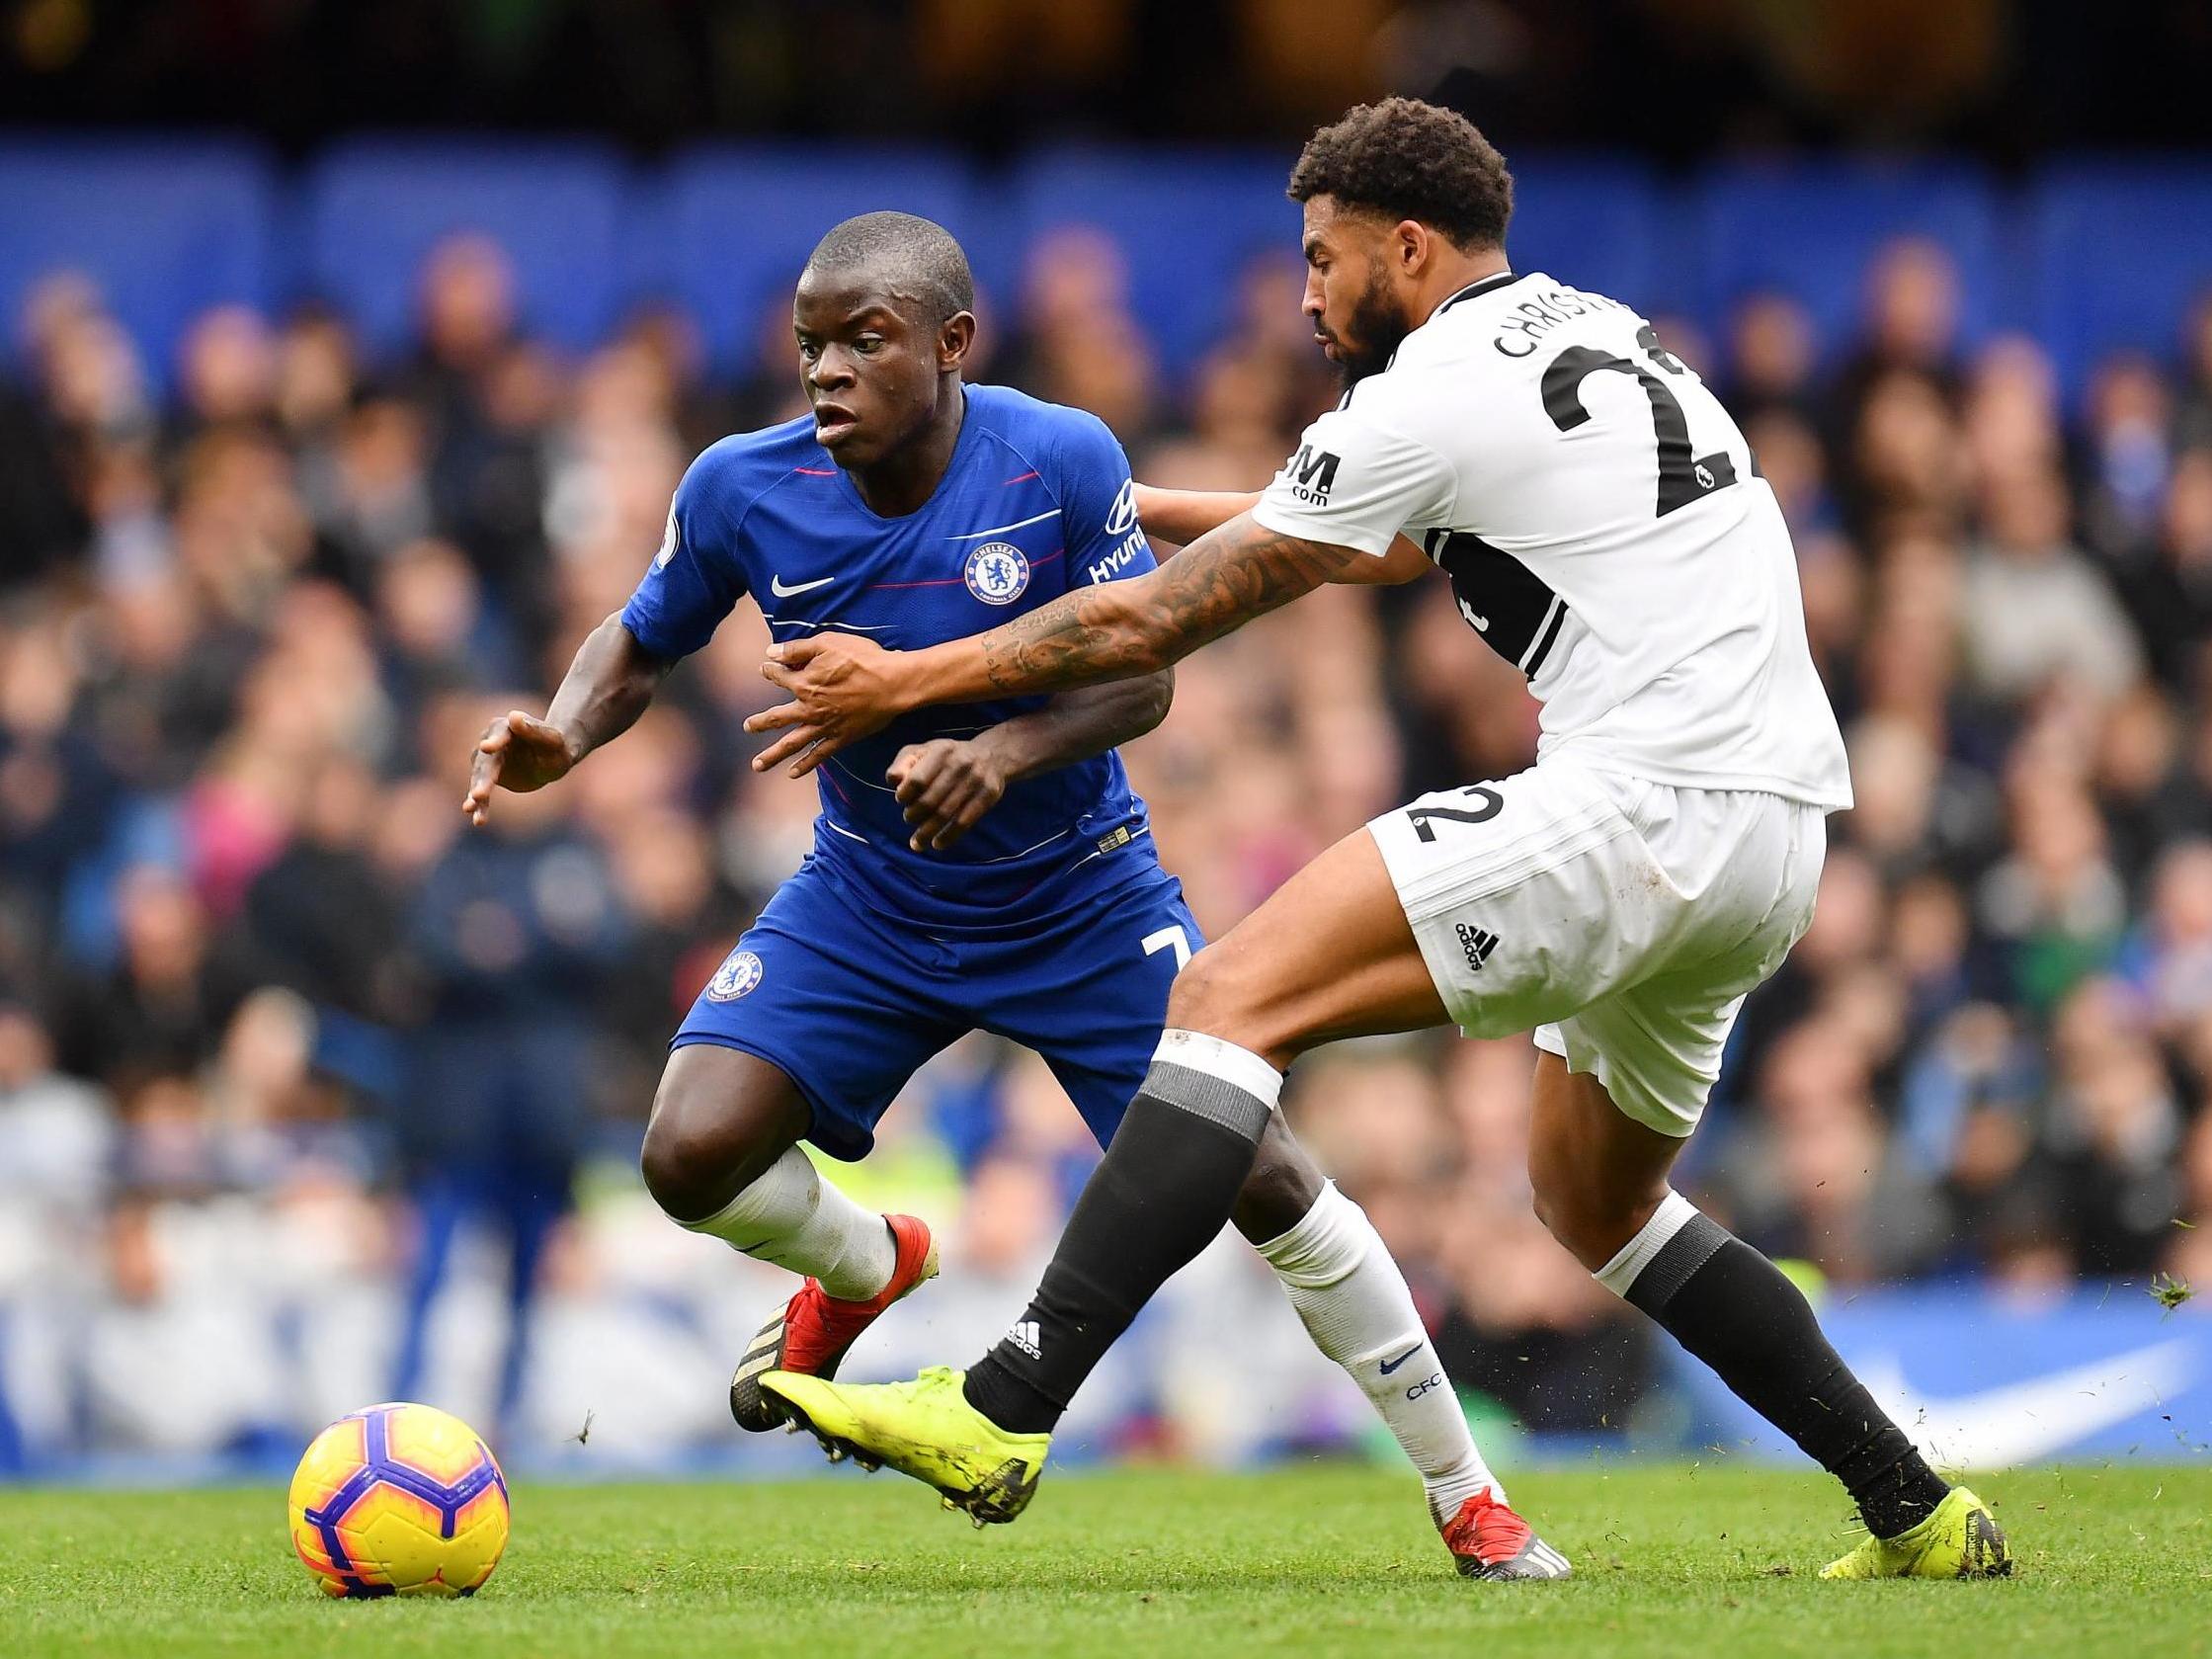 N’Golo Kante had a point to prove after Maurizio Sarri’s public criticism of his positioning (Getty Images)